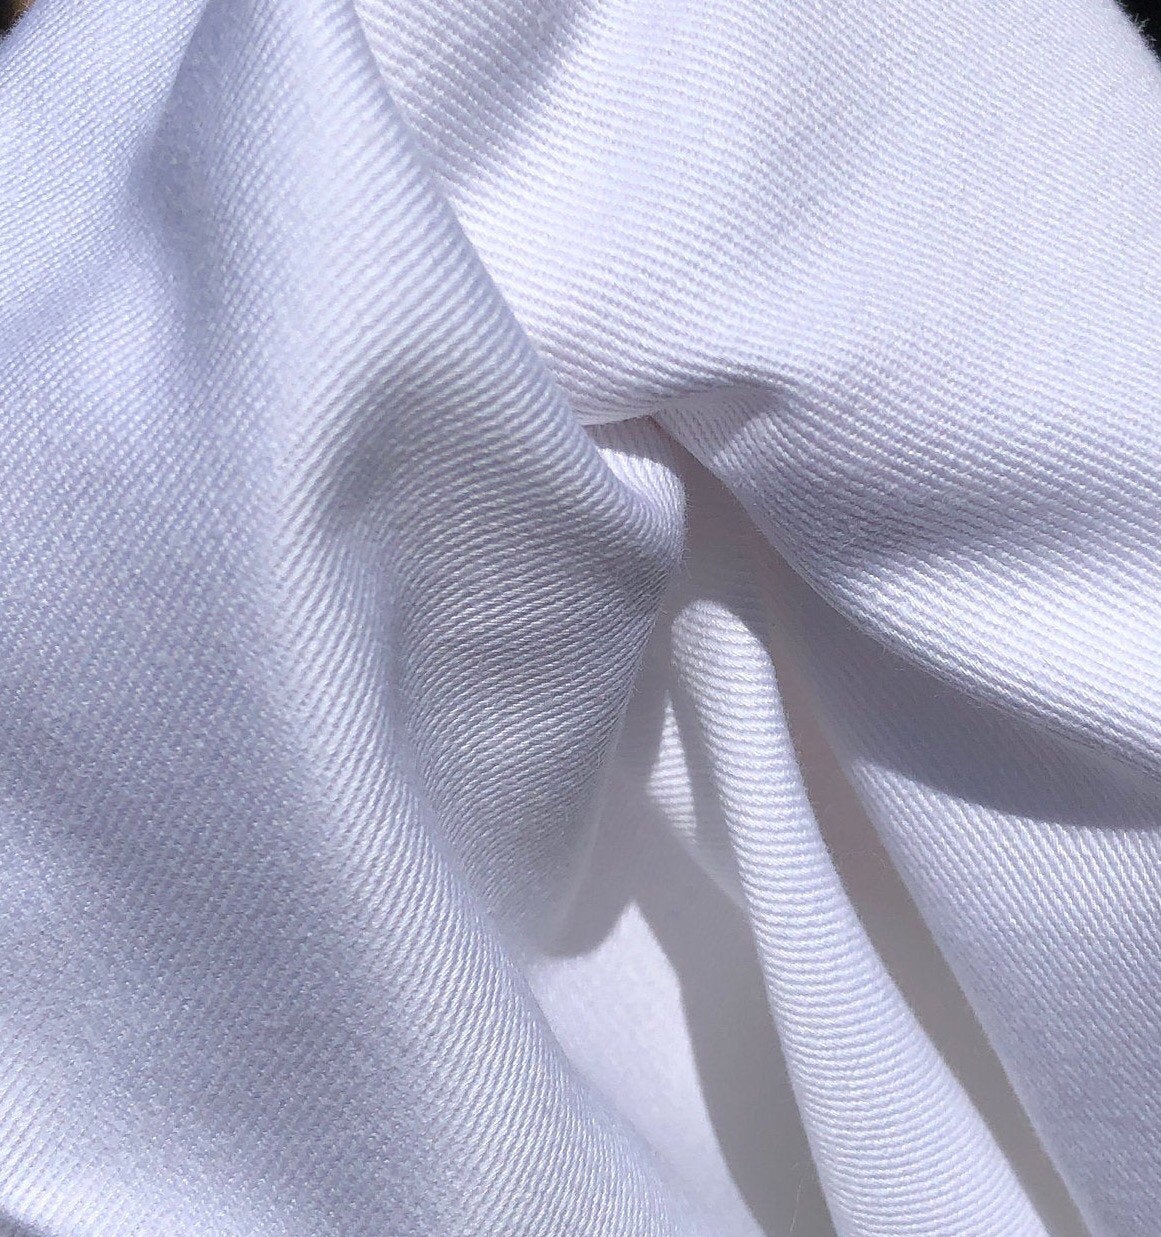 60 100% Cotton Twill 7 OZ Optic White Apparel Woven Fabric By the Yard